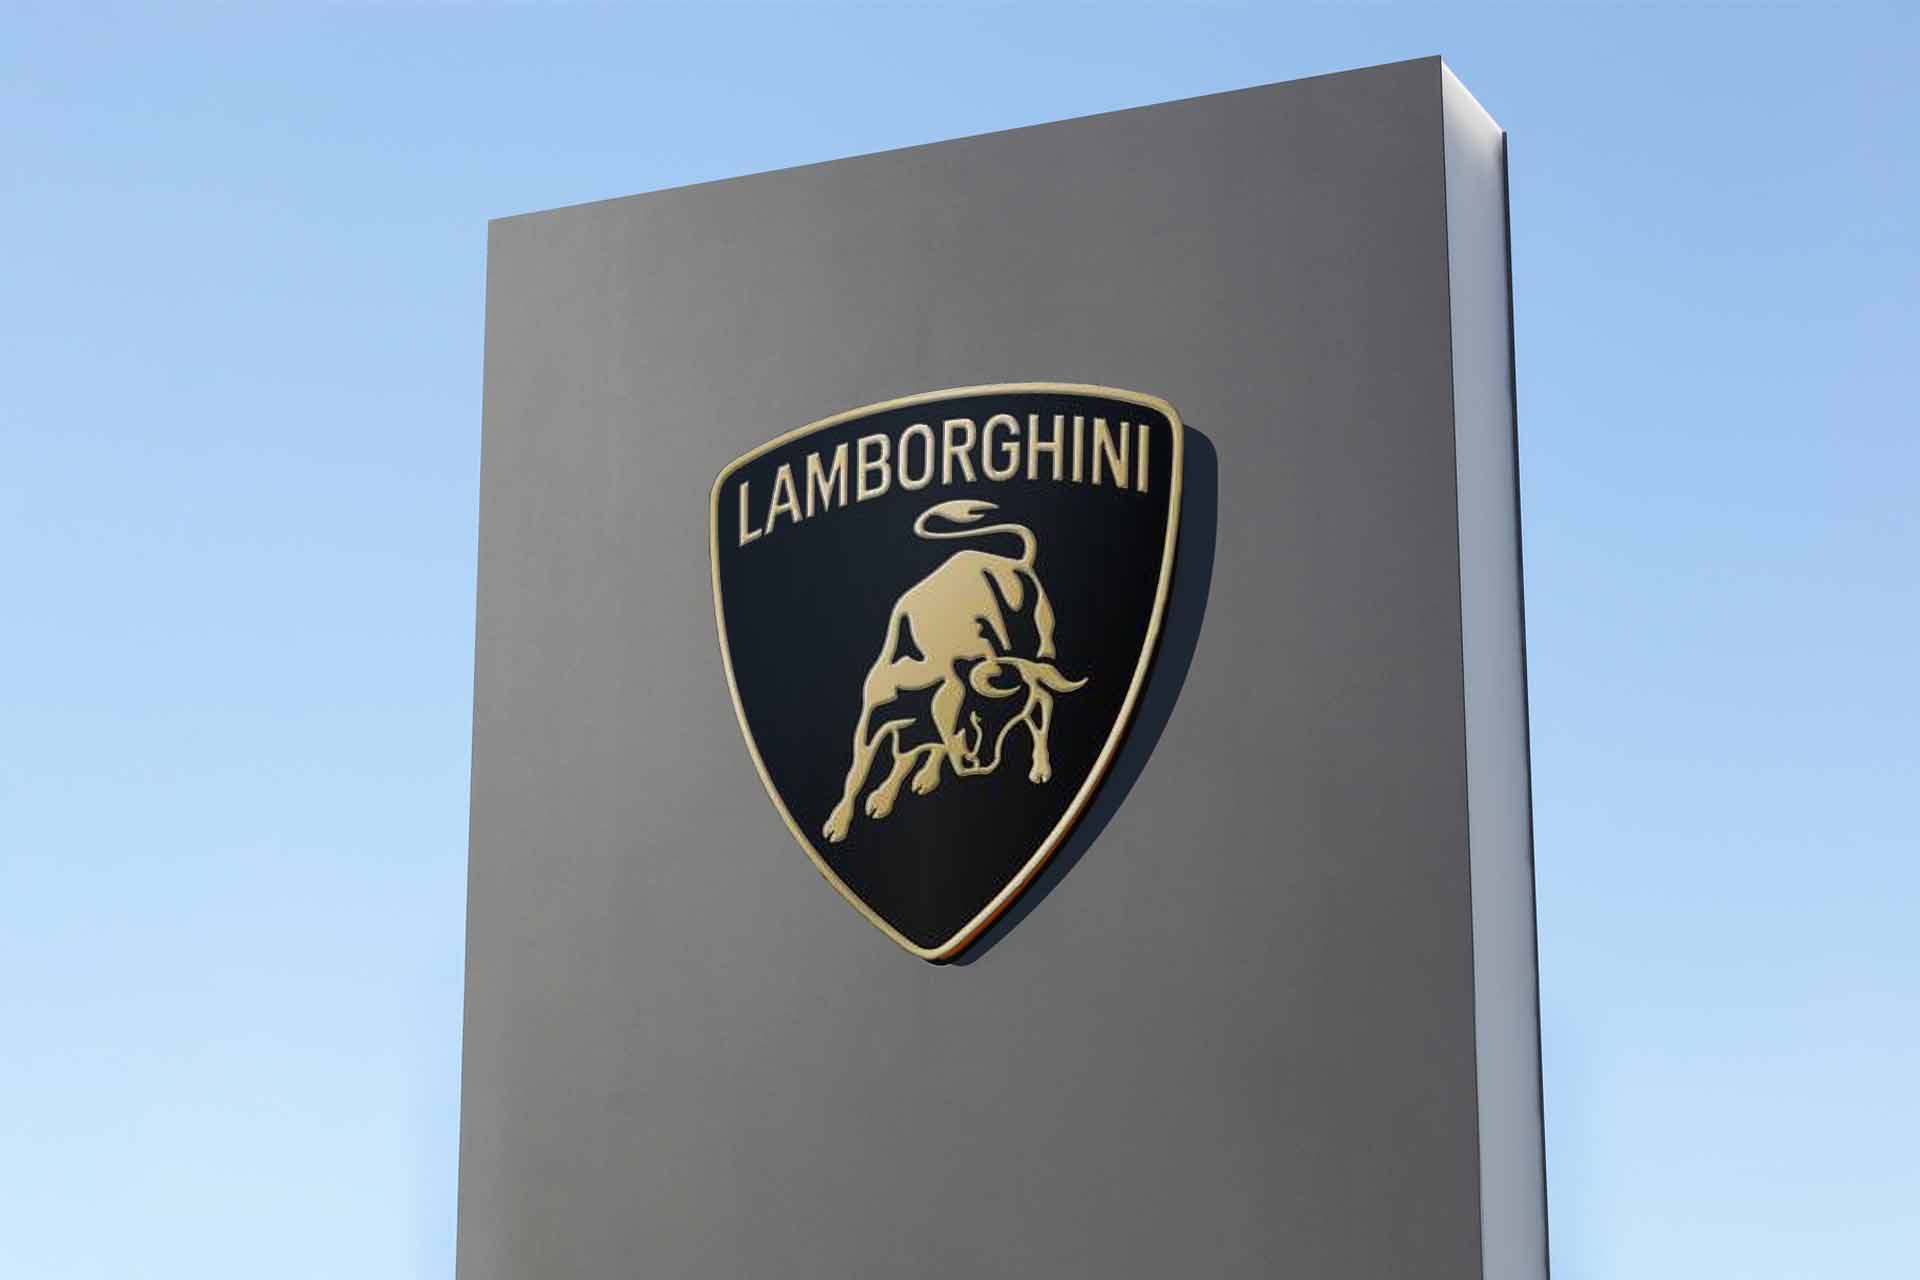 New Lamborghini logo on a chiron which would be in front of a Lamborghini dealership. Blue sky in the background.